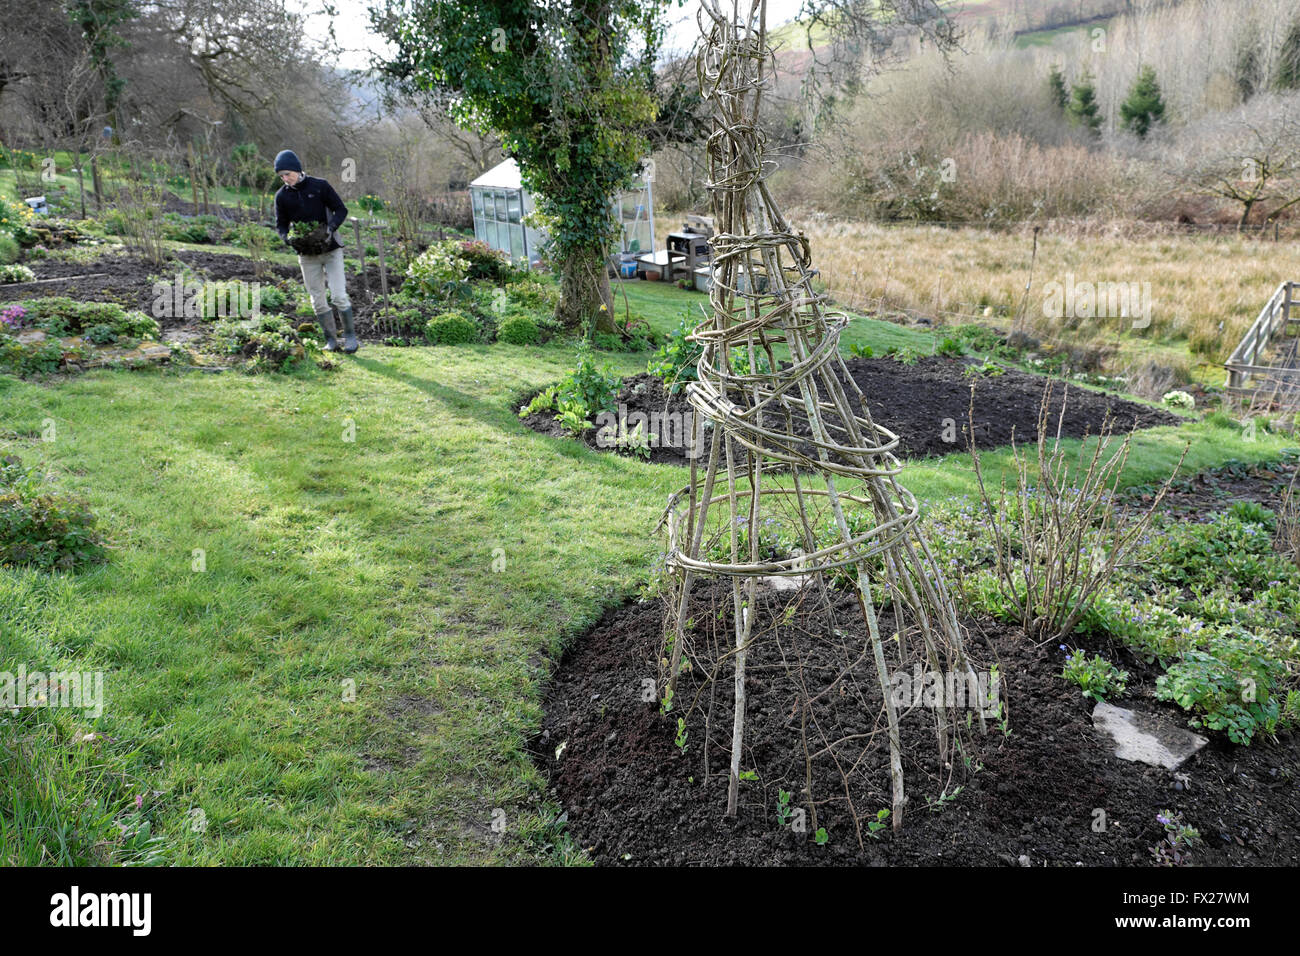 Willow sticks form a wigwam for growing sweet peas and woman working in a garden in April spring Carmarthenshire West Wales UK  KATHY DEWITT Stock Photo